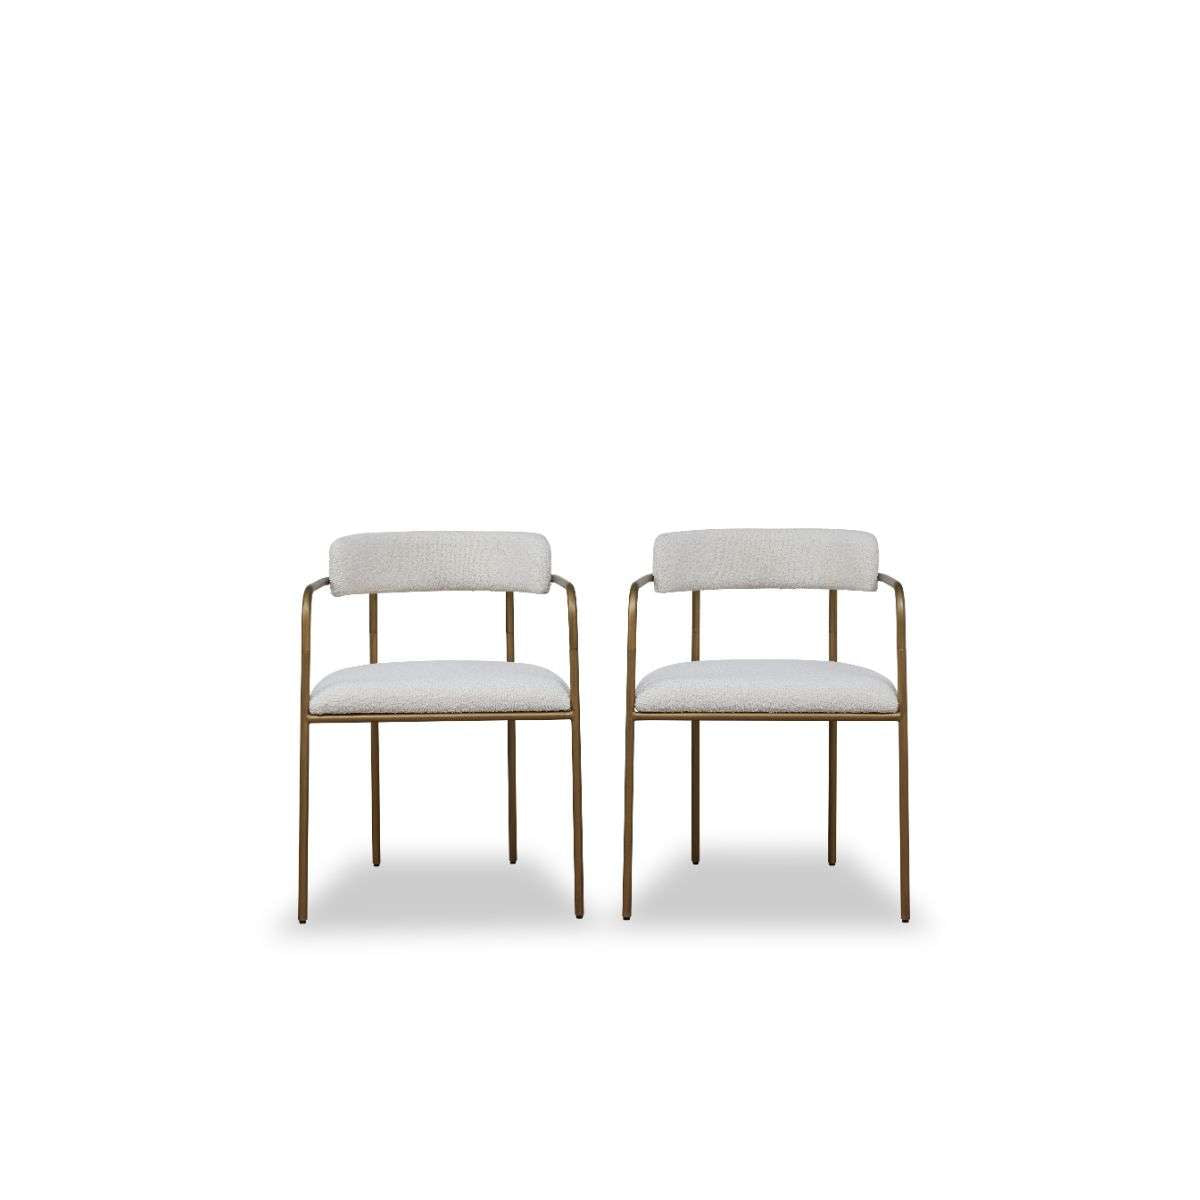 Celine Dining Chair - Set of 2 - Cream Boucle